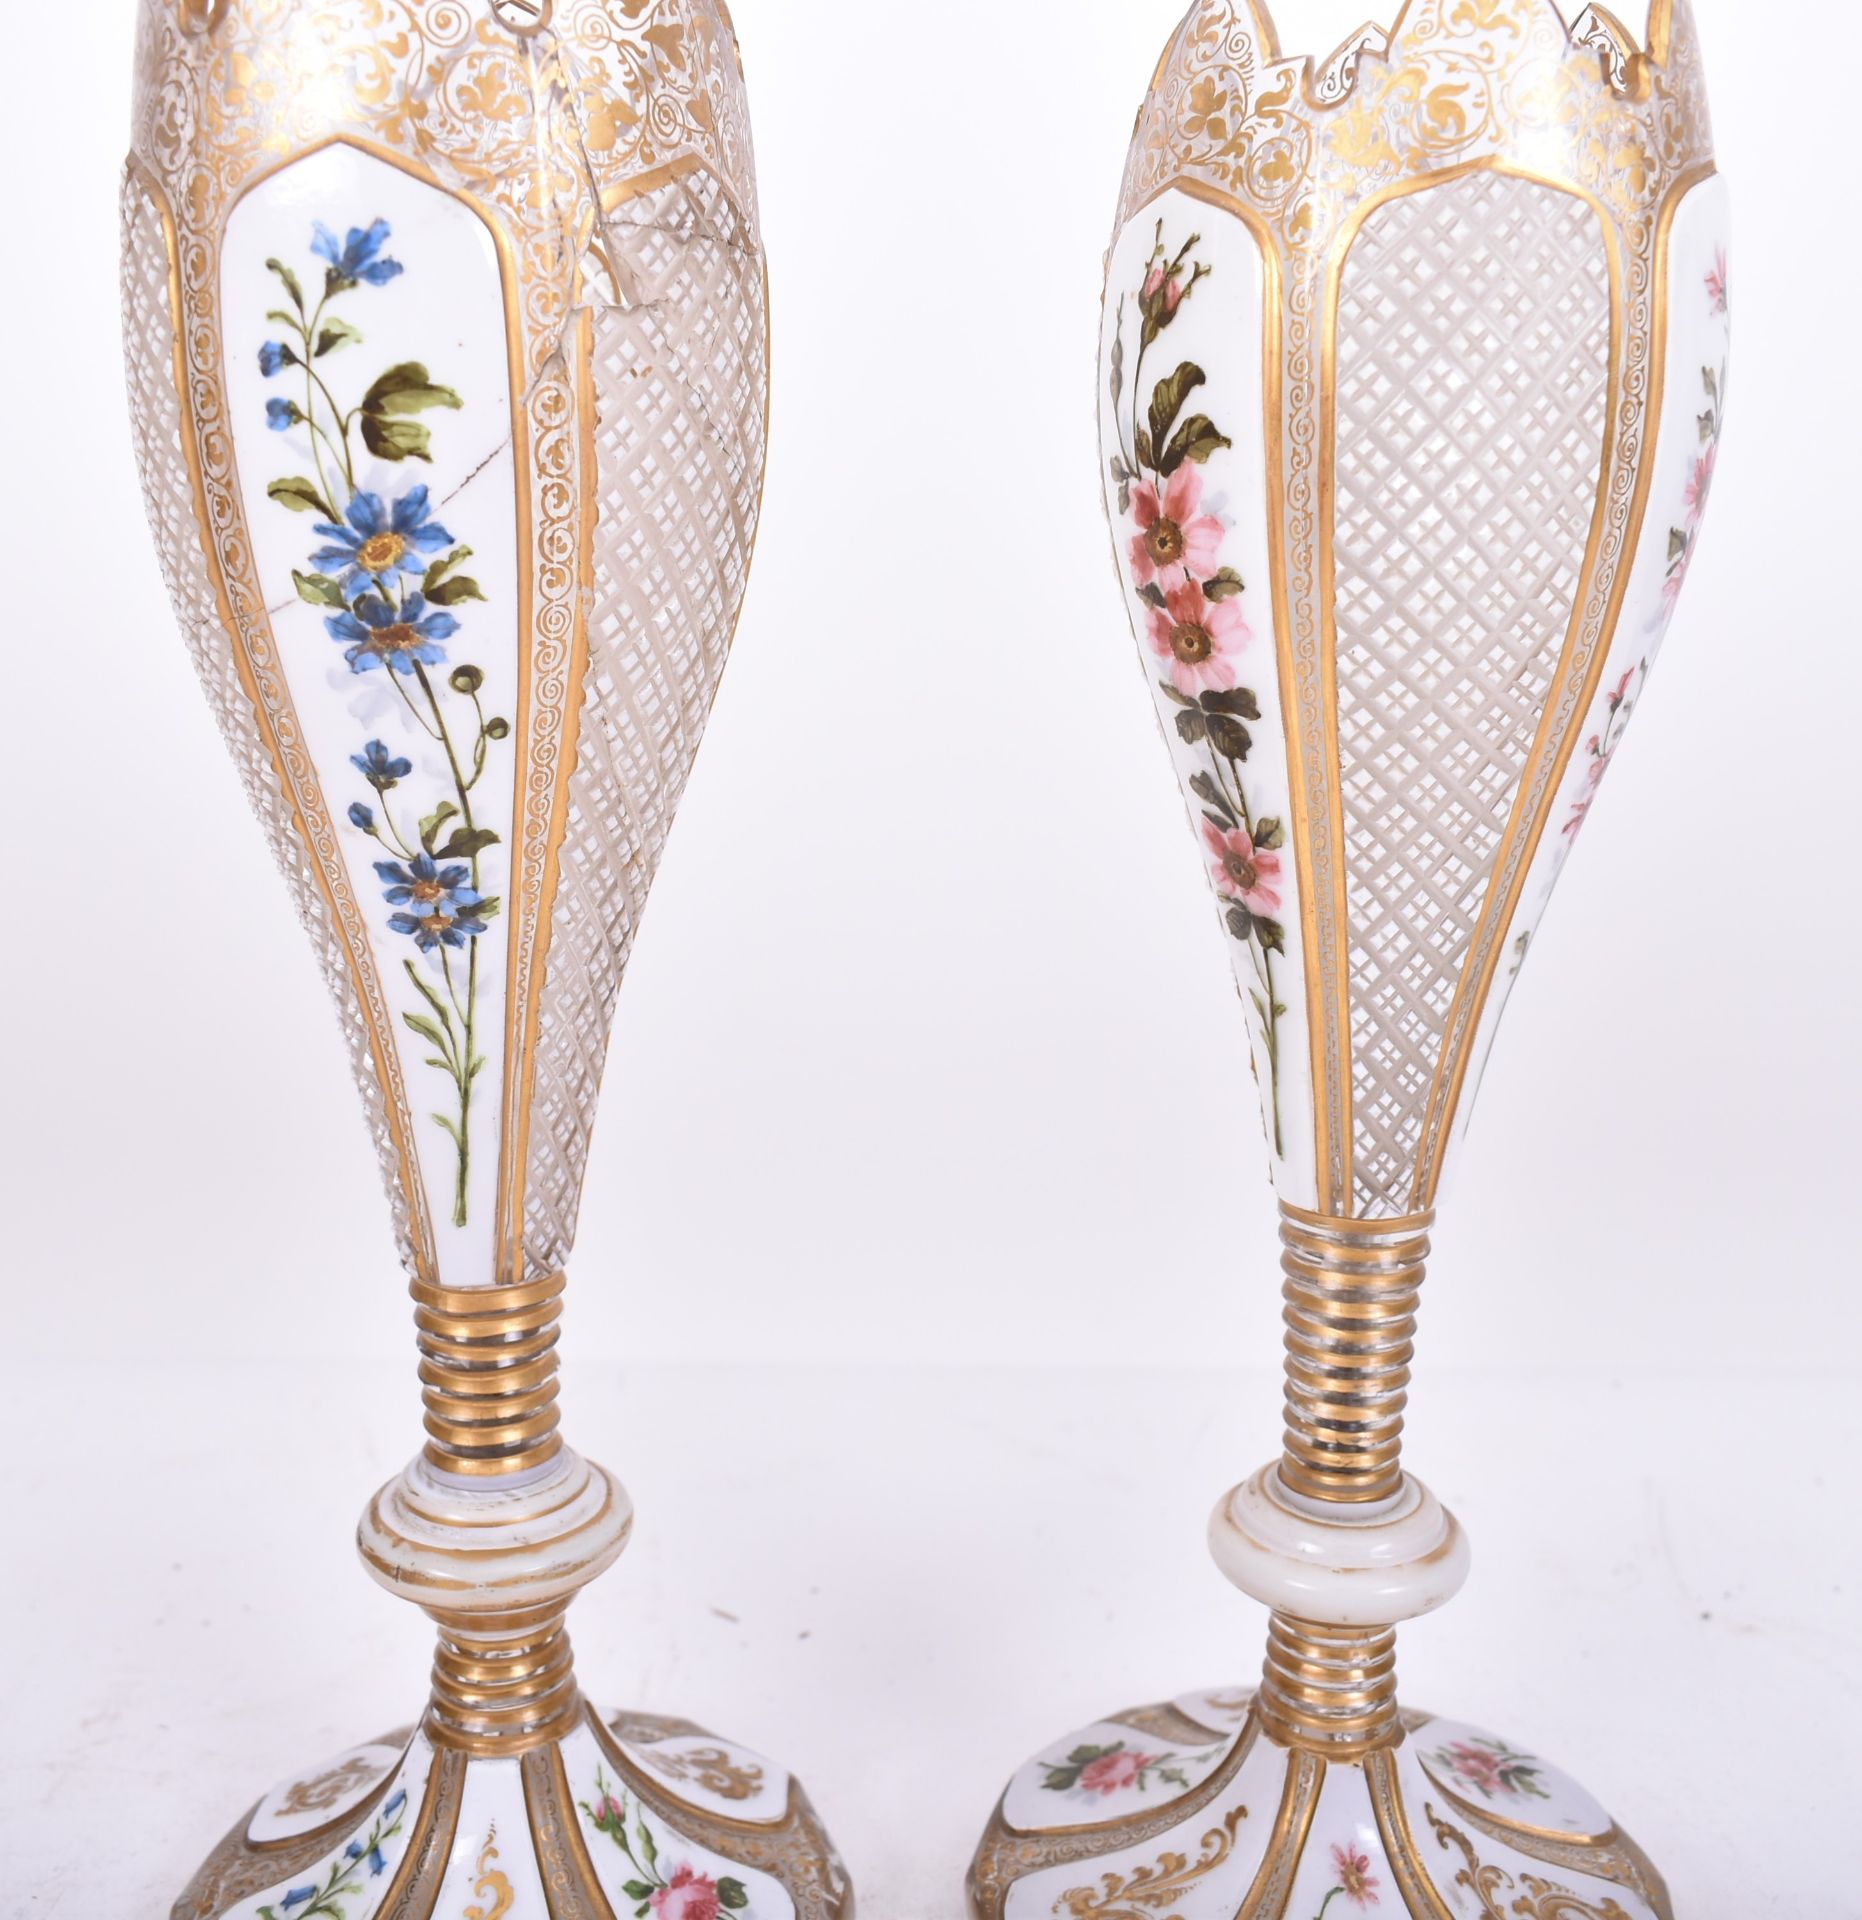 PAIR OF 19TH CENTURY BOHEMIAN CZECH OVERLAY GLASS VASES - Image 3 of 8